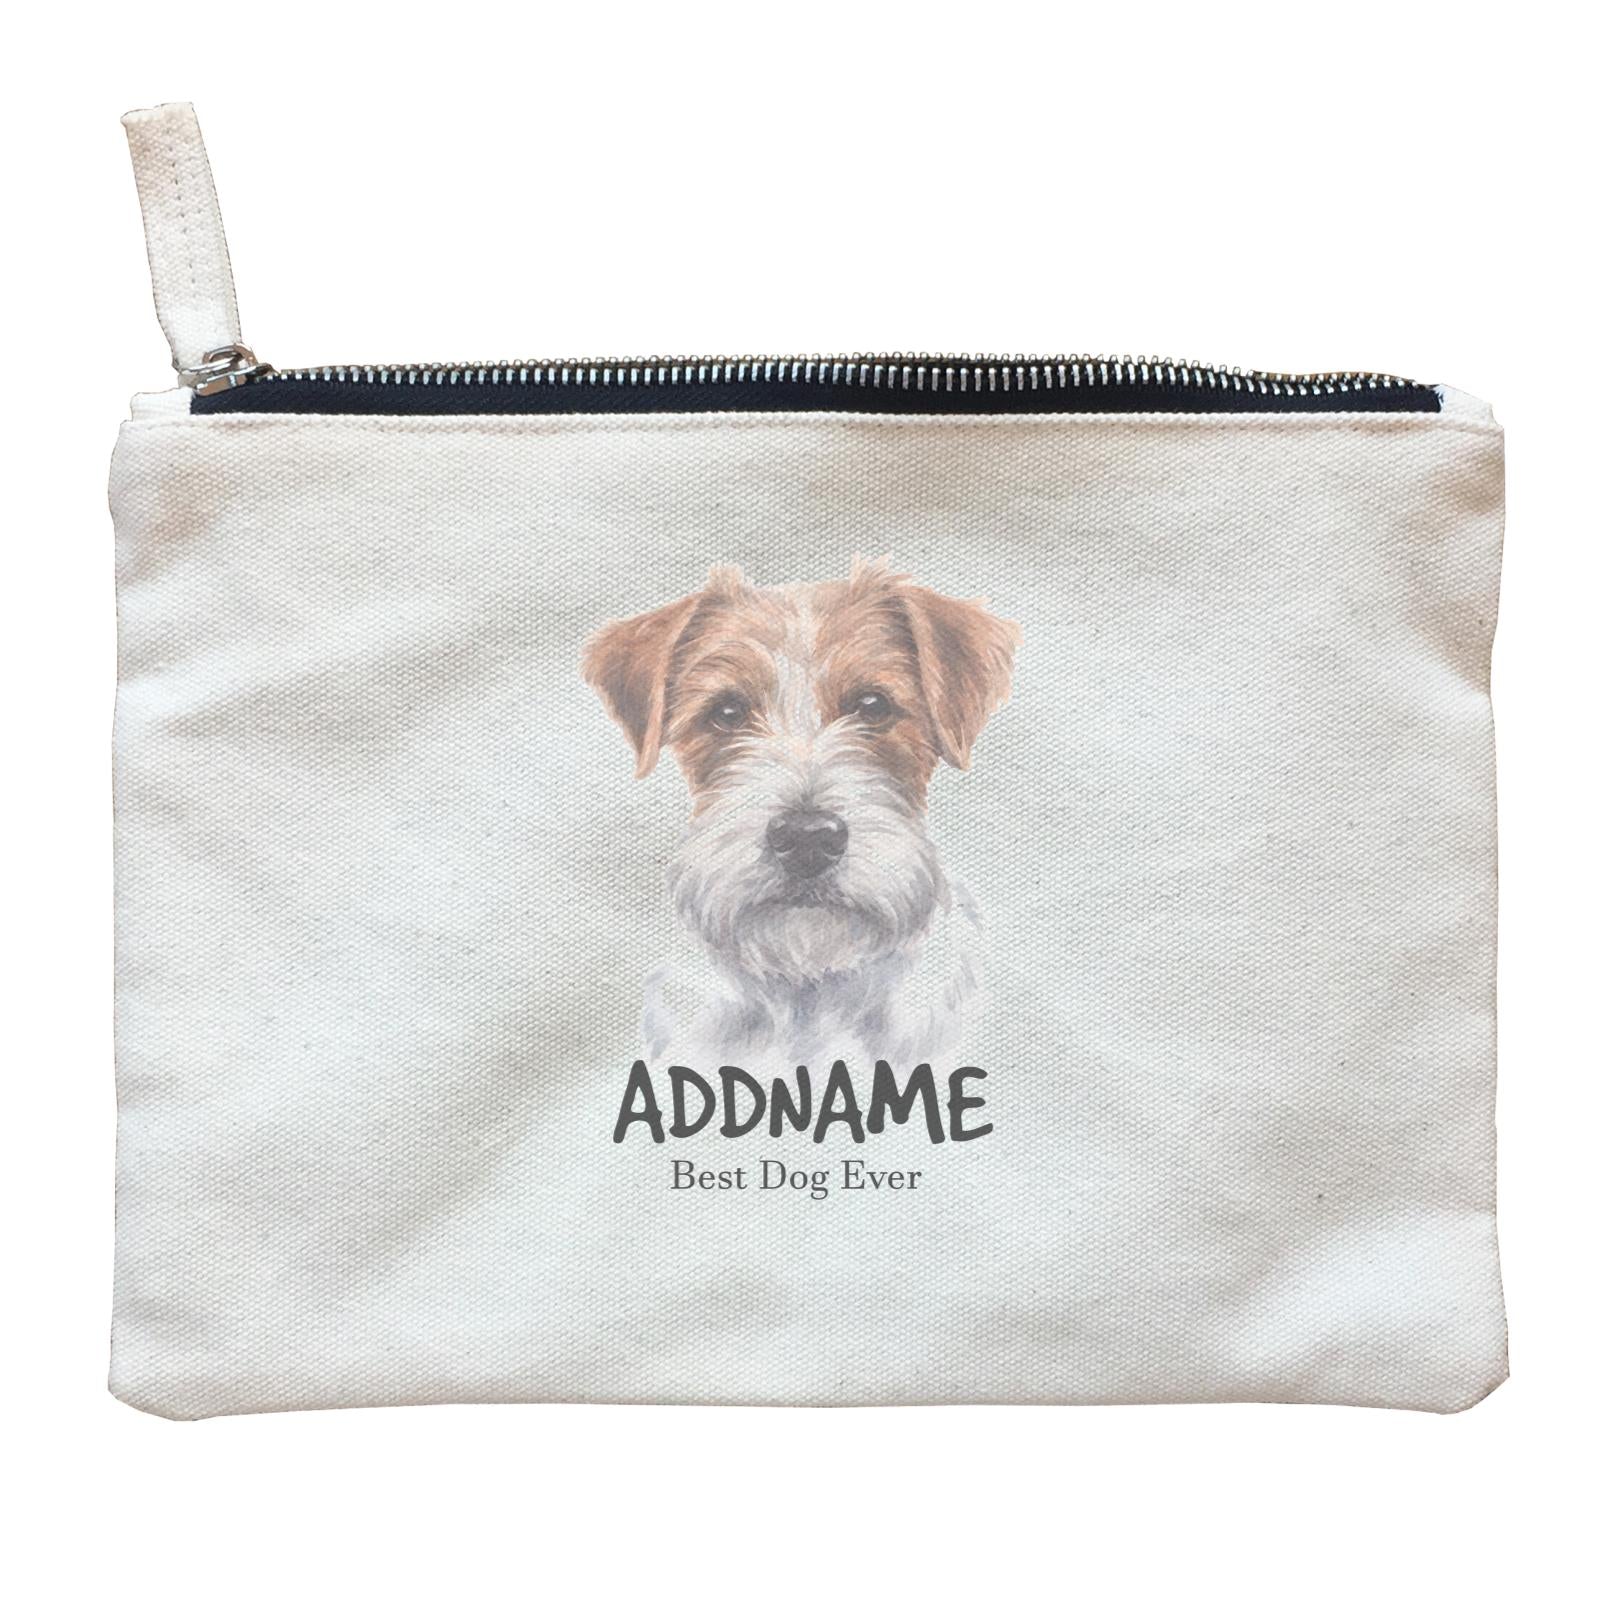 Watercolor Dog Jack Russell Hairy Best Dog Ever Addname Zipper Pouch